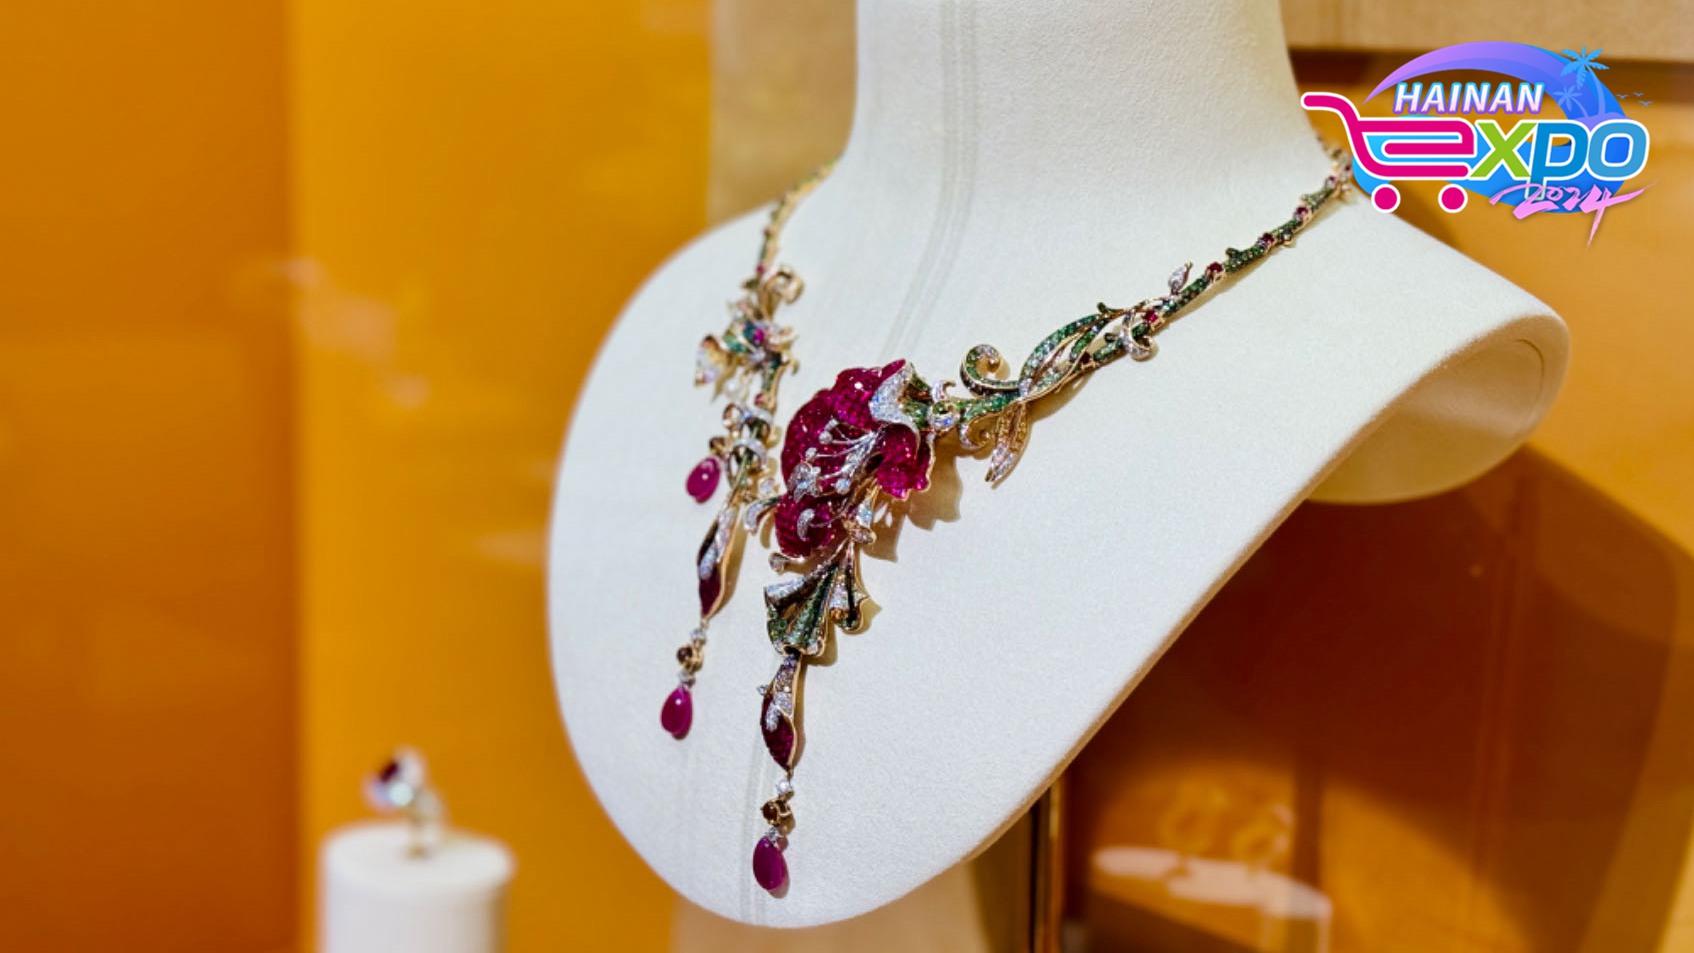 Expo in pics: Luxury jewelry shines in Hainan